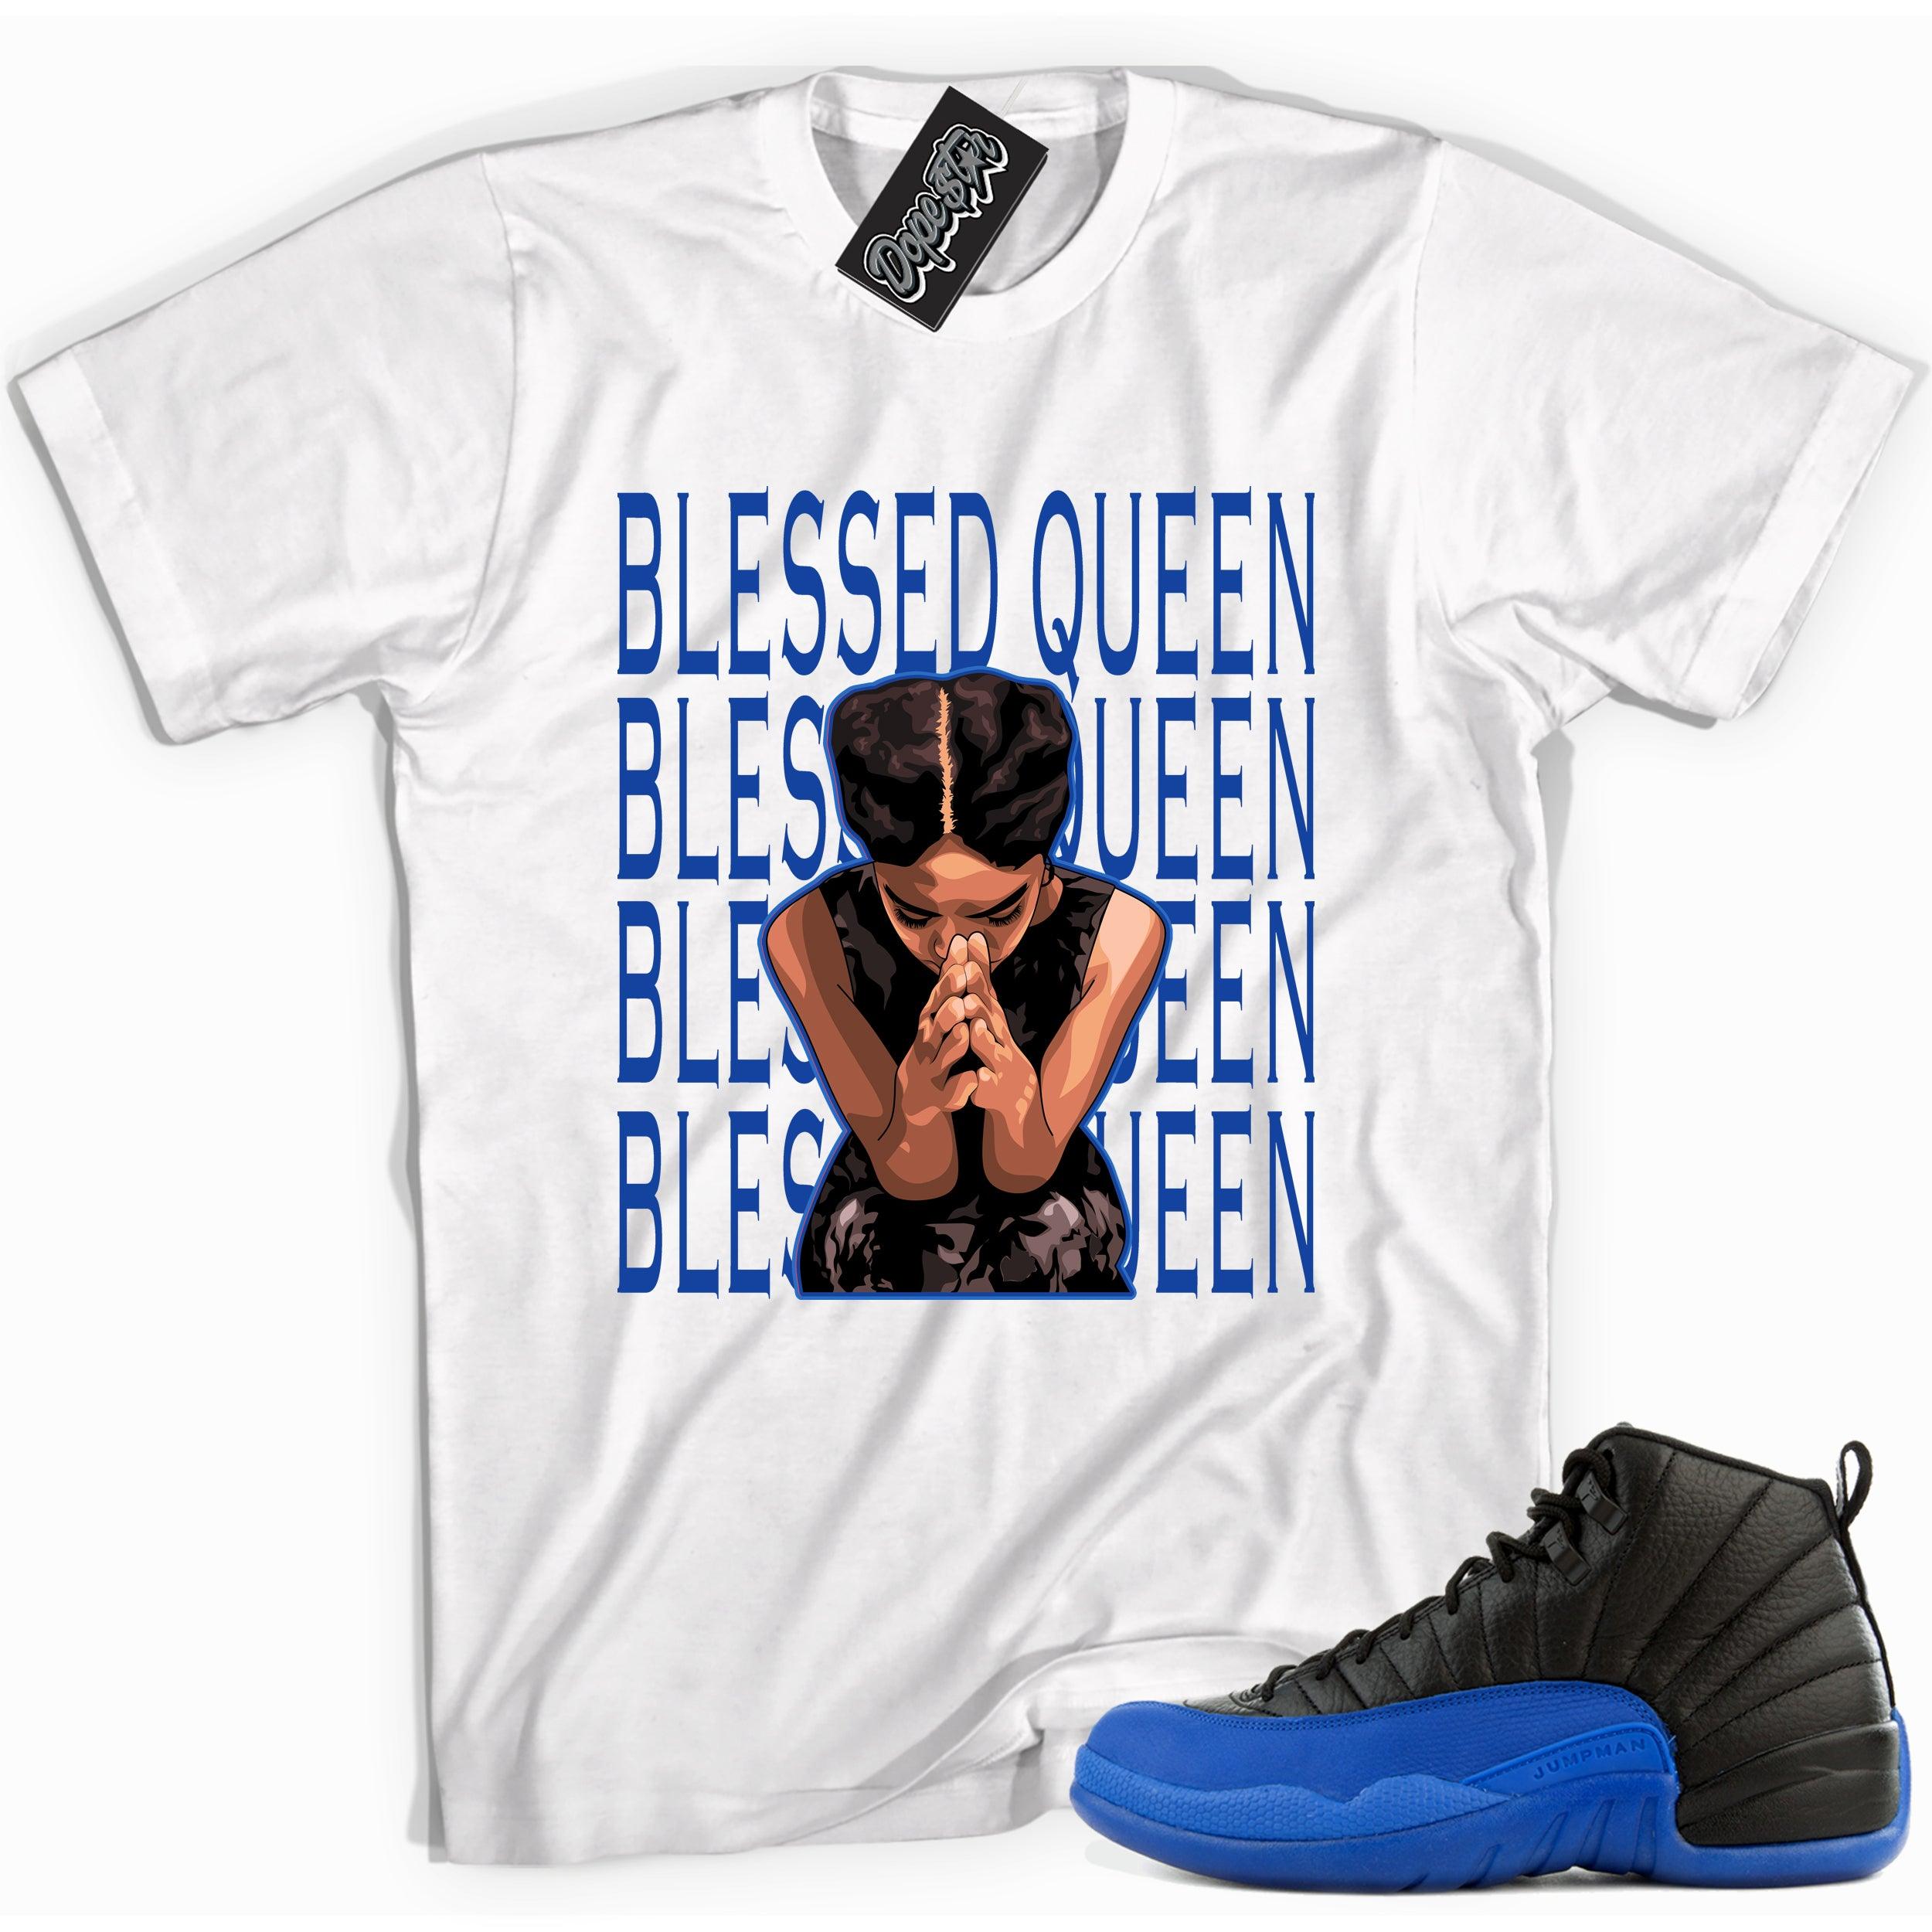 Cool white graphic tee with 'blessed queen' print, that perfectly matches Air Jordan 12 Retro Black Game Royal sneakers.